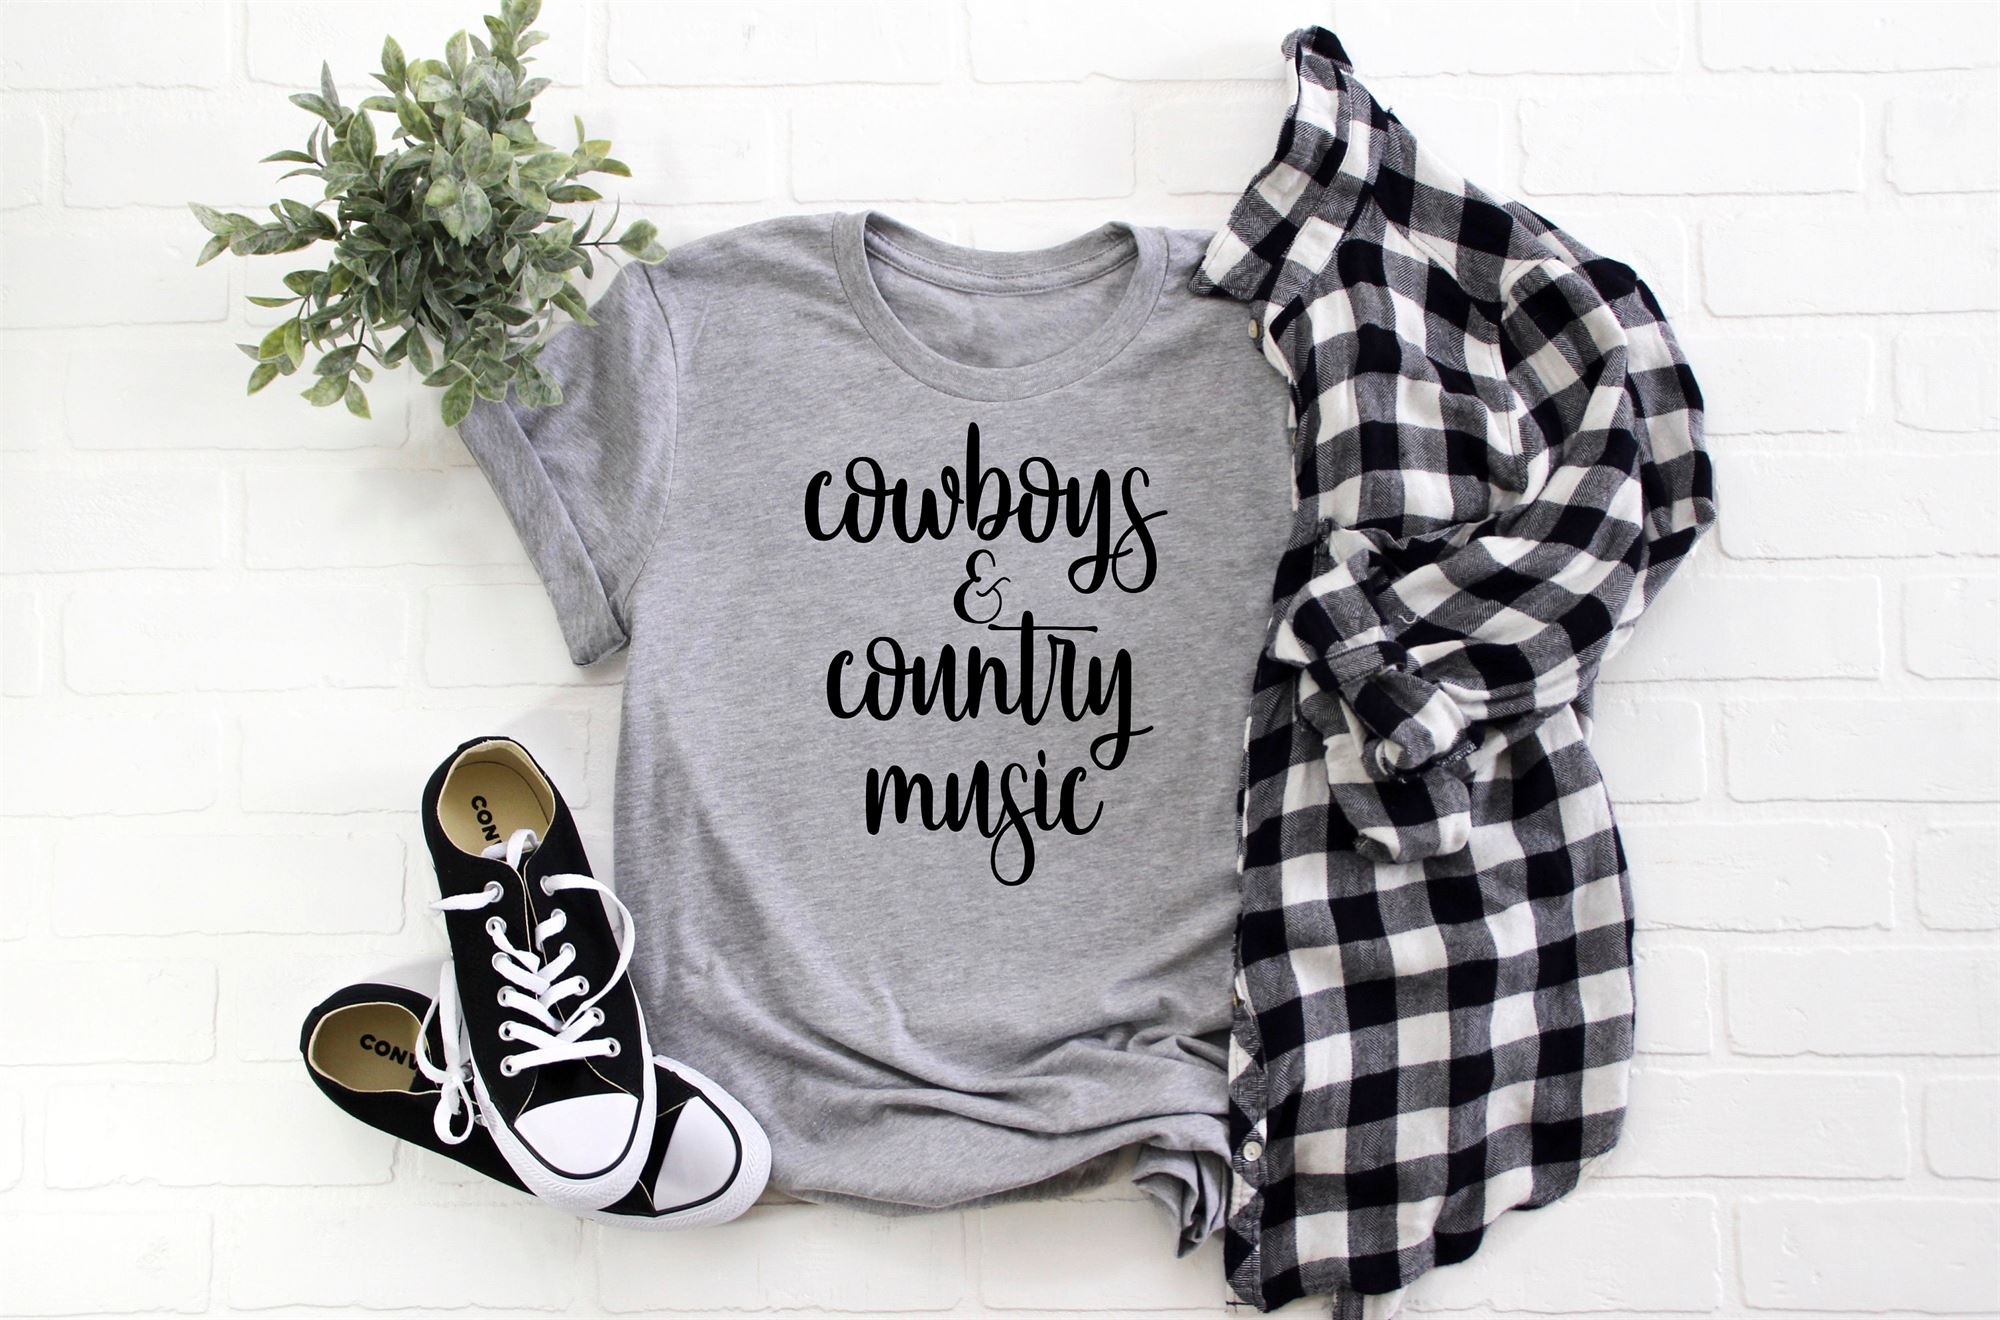 Best Country Fest Tees Cowboys And Country Music Shirt Fest Tee Southern Vibes Country Fest Shirts Country Music Festival Music Fest 